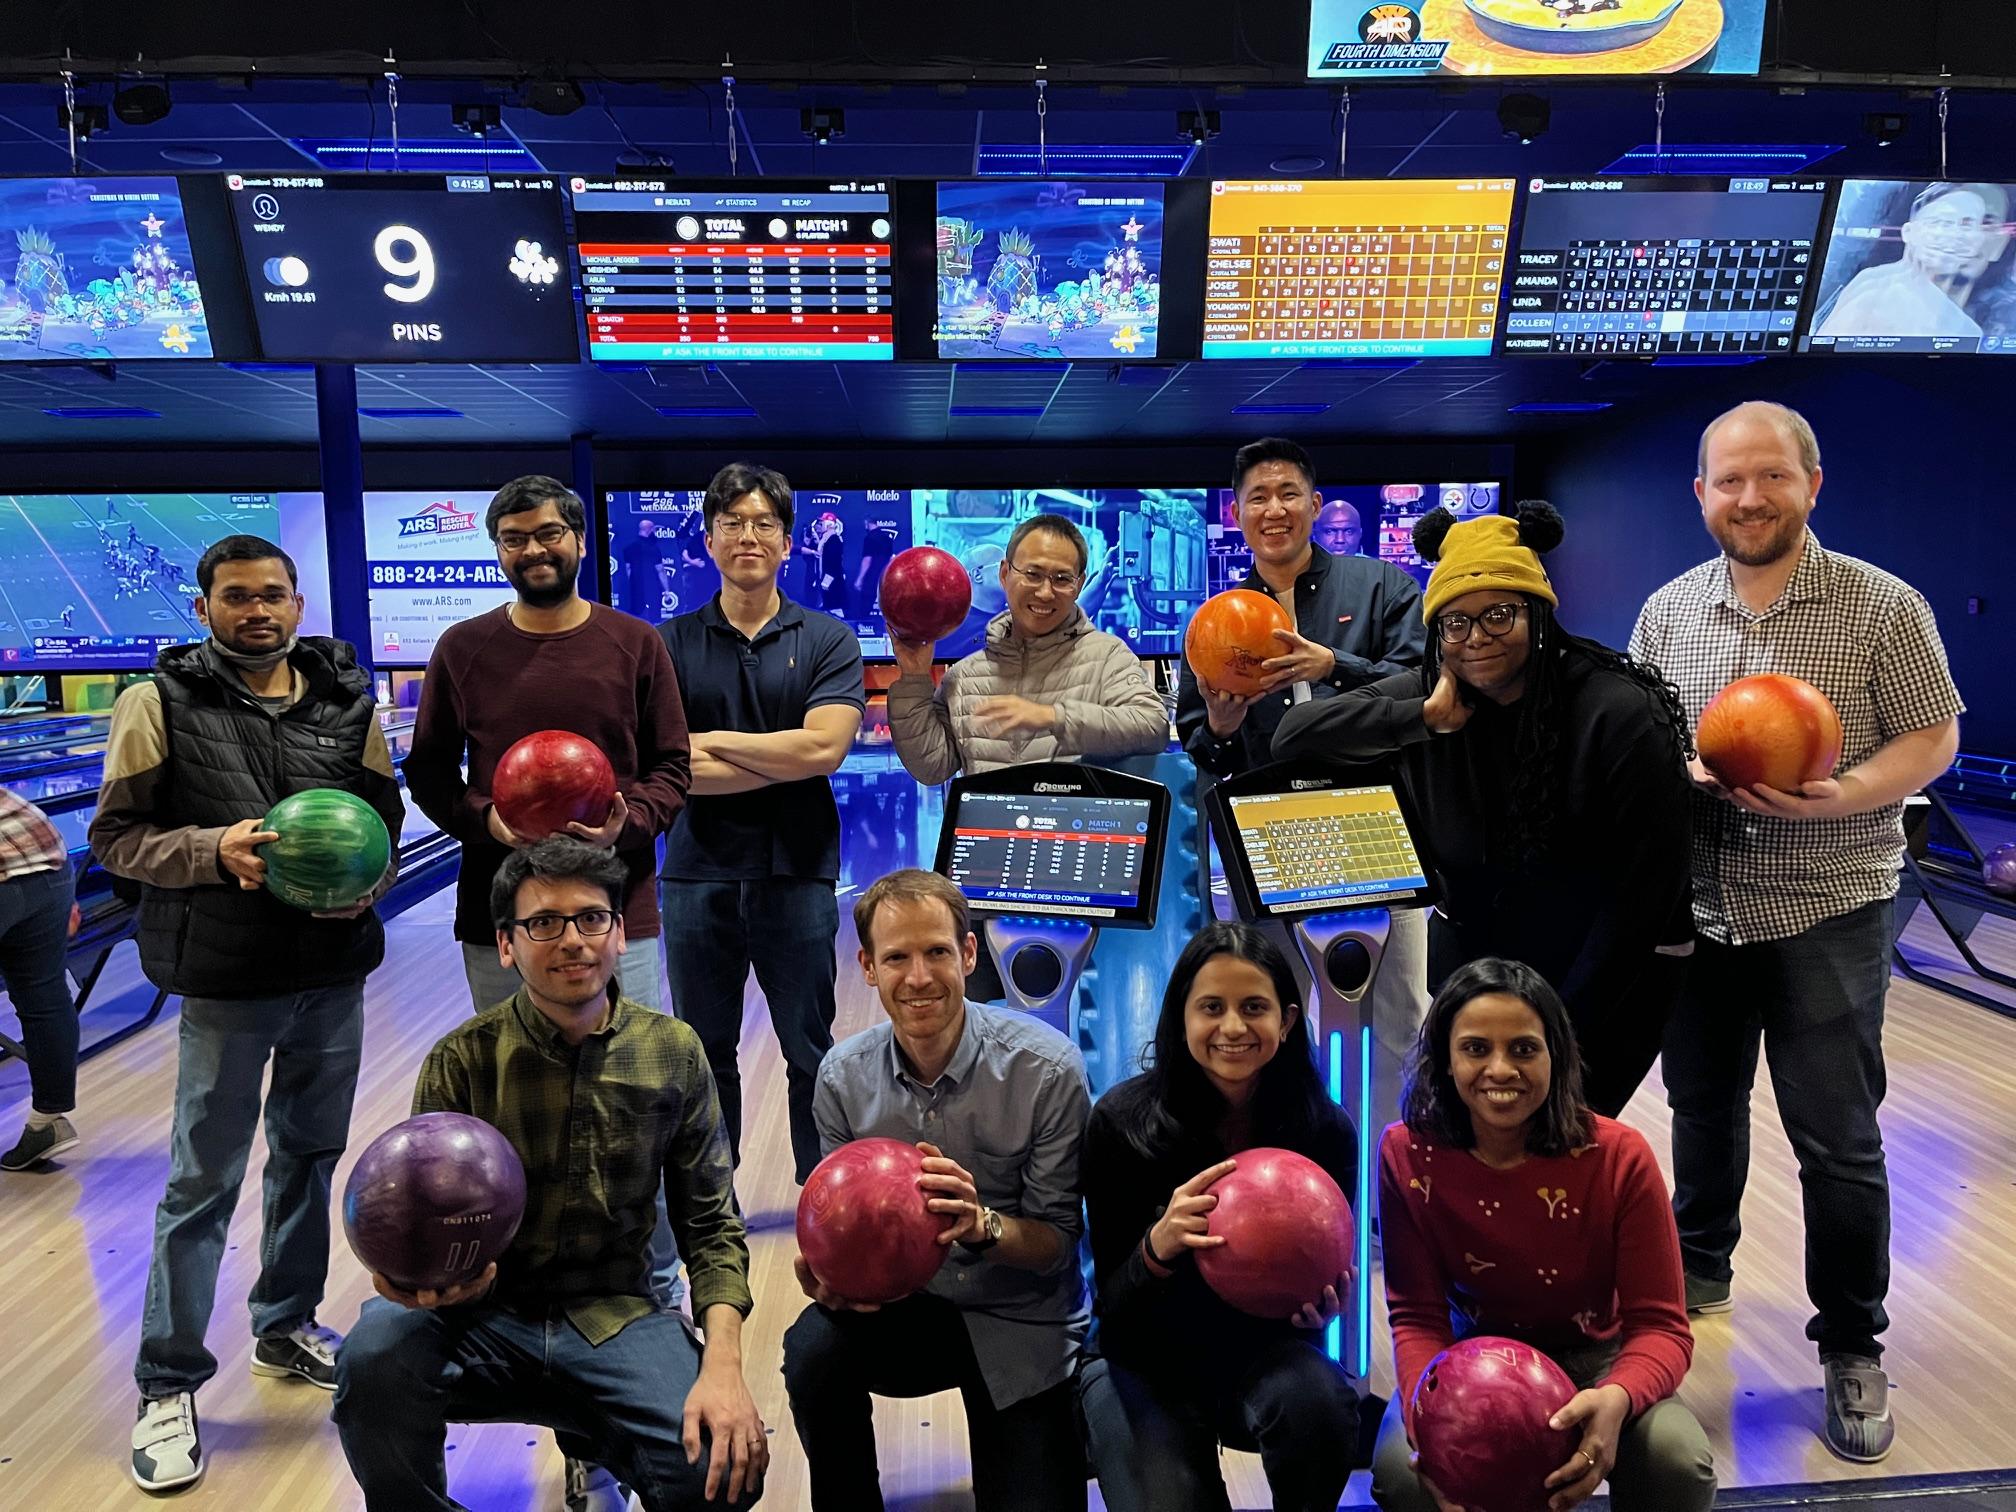 Group picture after playing bowling during our holiday gathering 2023